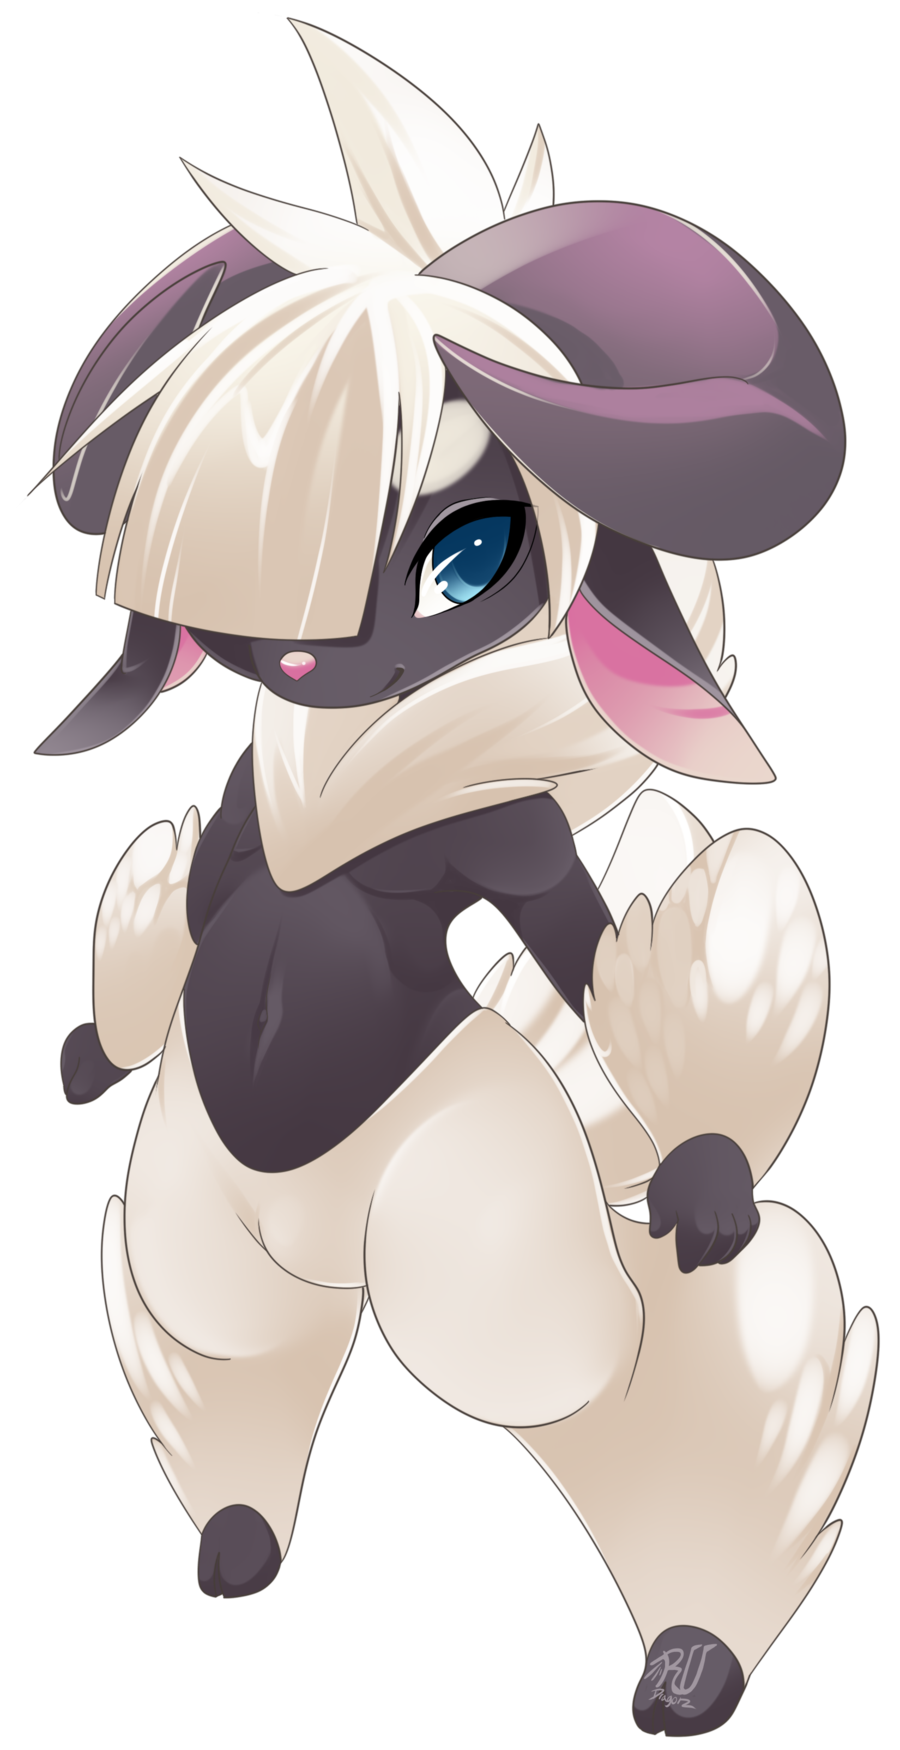 PNGTUBER Cute Sheep Girl / 5 Expression / Premade / Animal Vtuber /  Streamer / 2D Model Assets / Tiktok / Twitch / Veadotube / Anime - Etsy |  Cute sheep, Cute, Drawing illustrations